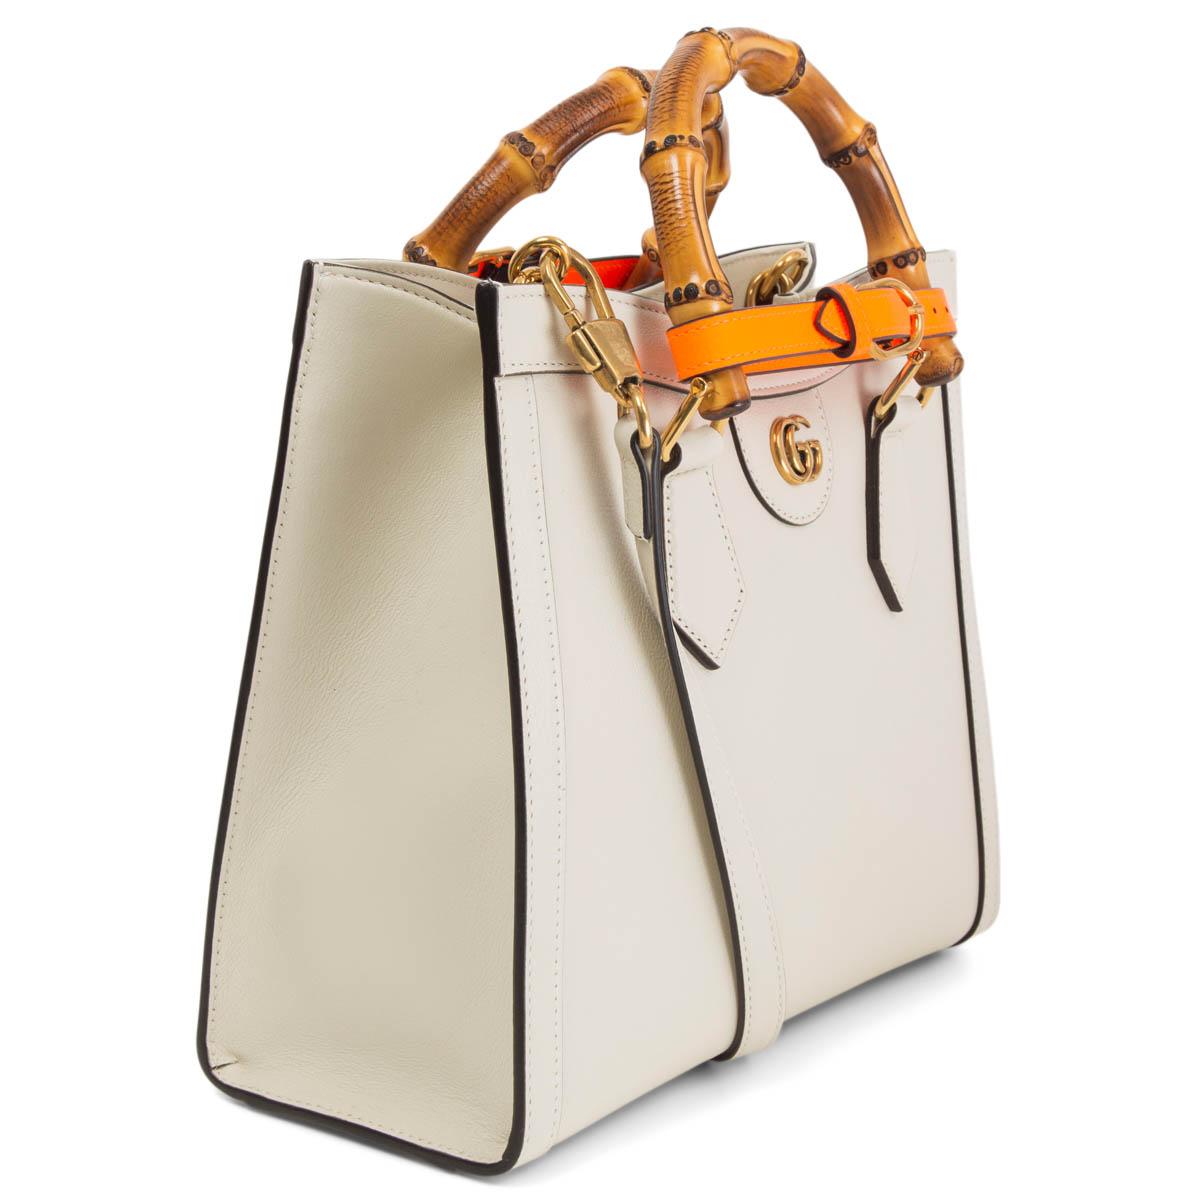 100% authentic Gucci Diana Small Tote Bag in ecru calfskin, combining recognizable elements of the House, the small tote bag is defined by its bamboo handles and gold-tone Double G hardware. The bag is further accentuated by two orange neon straps,